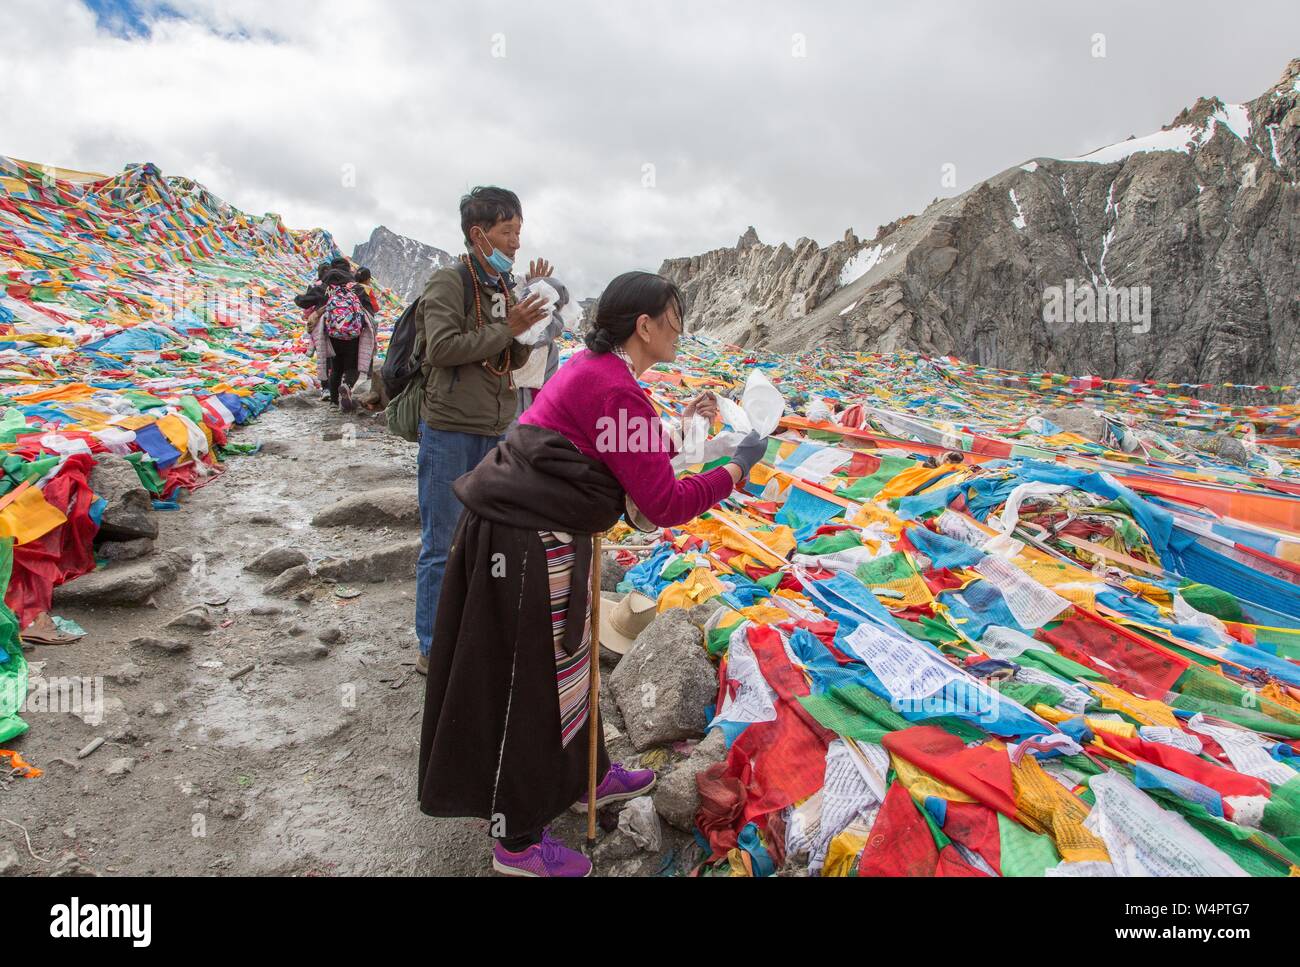 As a thank you, the highest point, 5630m, the Kora to have reached the Kailash, pilgrims leave a prayer flag, Dolma La, Tibet, China Stock Photo